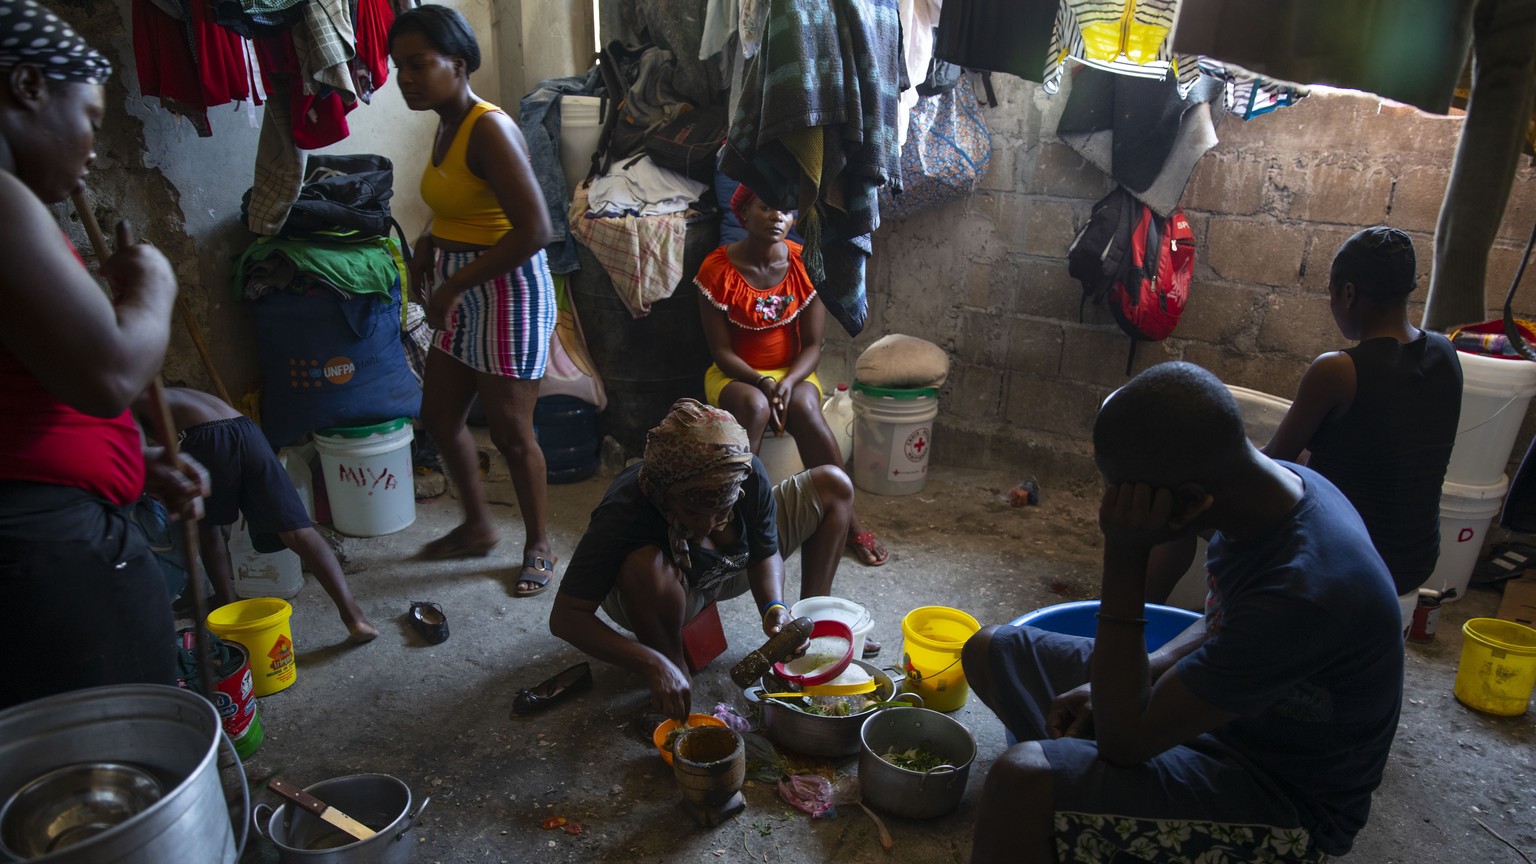 A woman prepares food at a shelter for families displaced by gang violence in Port-au-Prince, Haiti, Thursday, Dec. 9, 2021. A spike in violence has deepened hunger and poverty in Haiti while hinderin ...